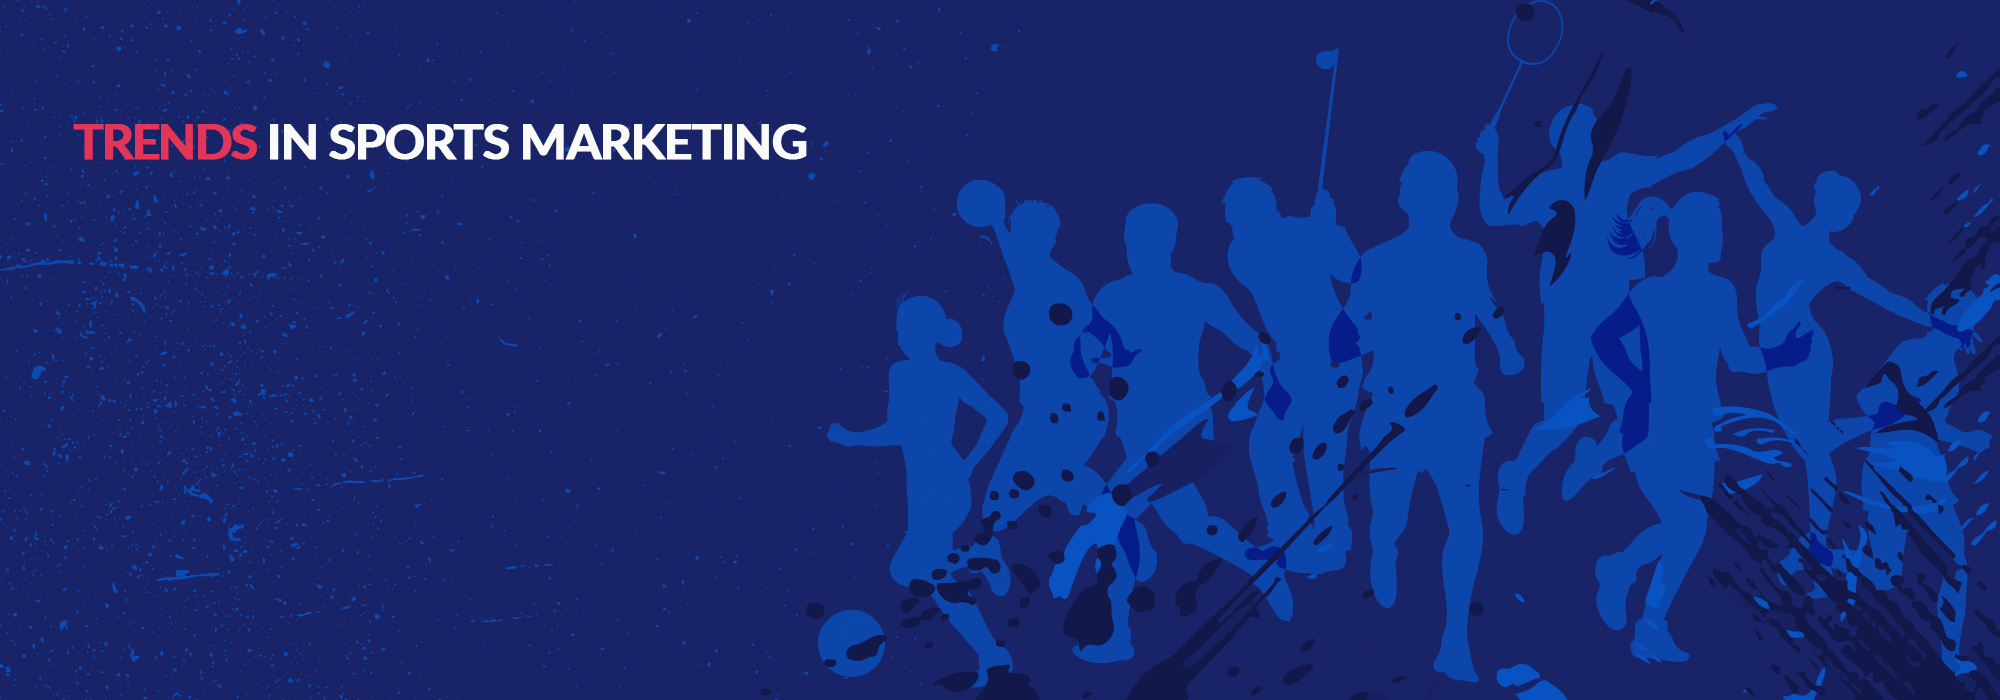 Trends in sports marketing Banner3